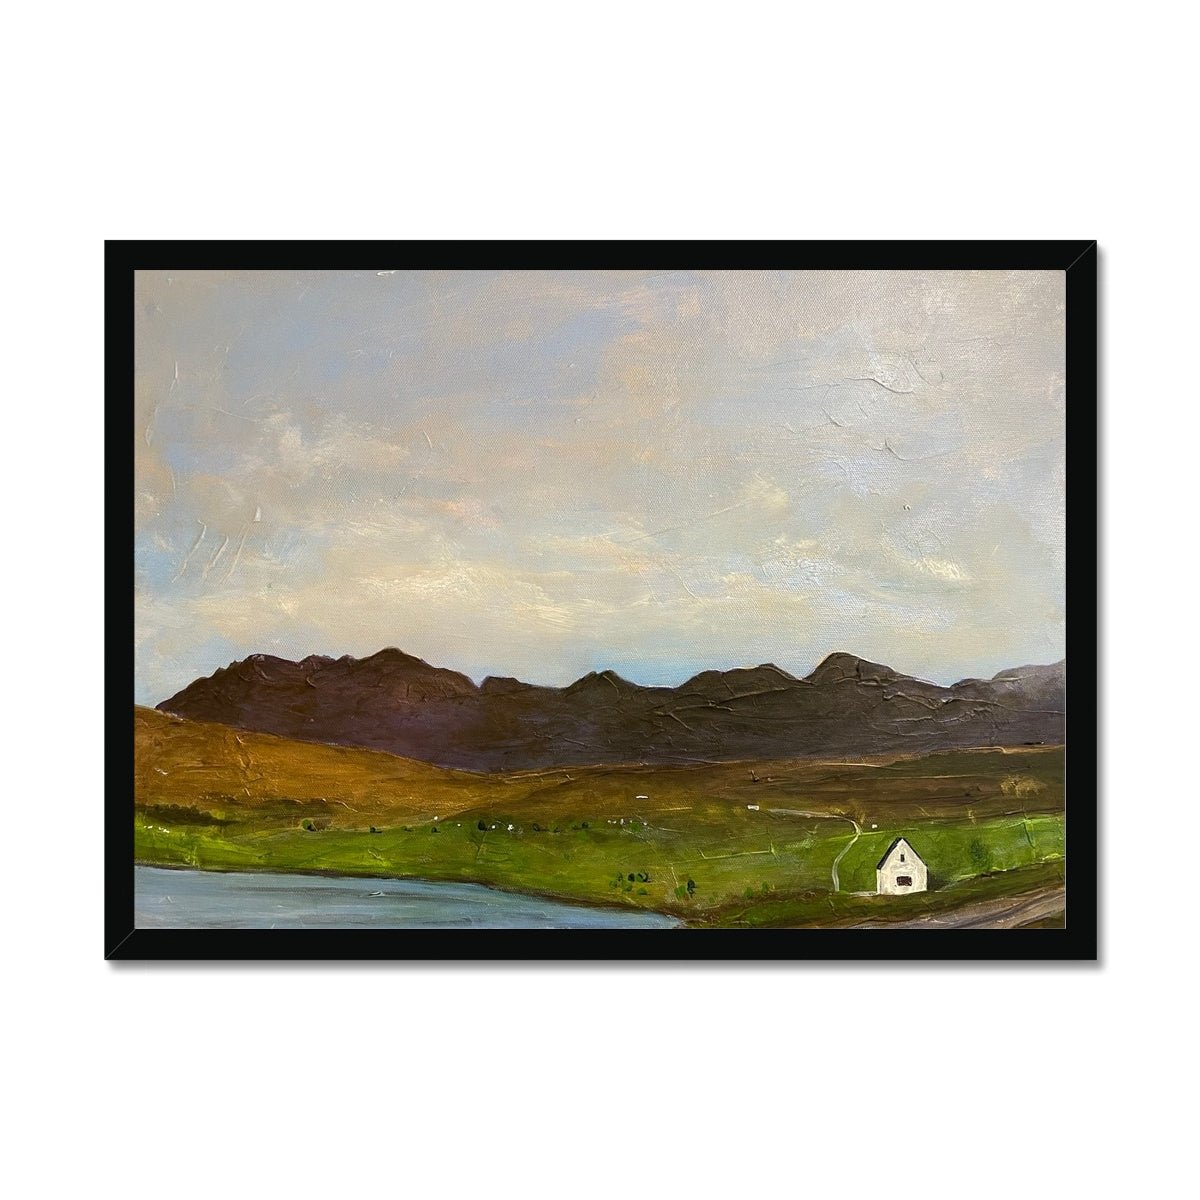 The Road To Carbost Skye Painting | Framed Prints From Scotland-Framed Prints-Skye Art Gallery-A2 Landscape-Black Frame-Paintings, Prints, Homeware, Art Gifts From Scotland By Scottish Artist Kevin Hunter